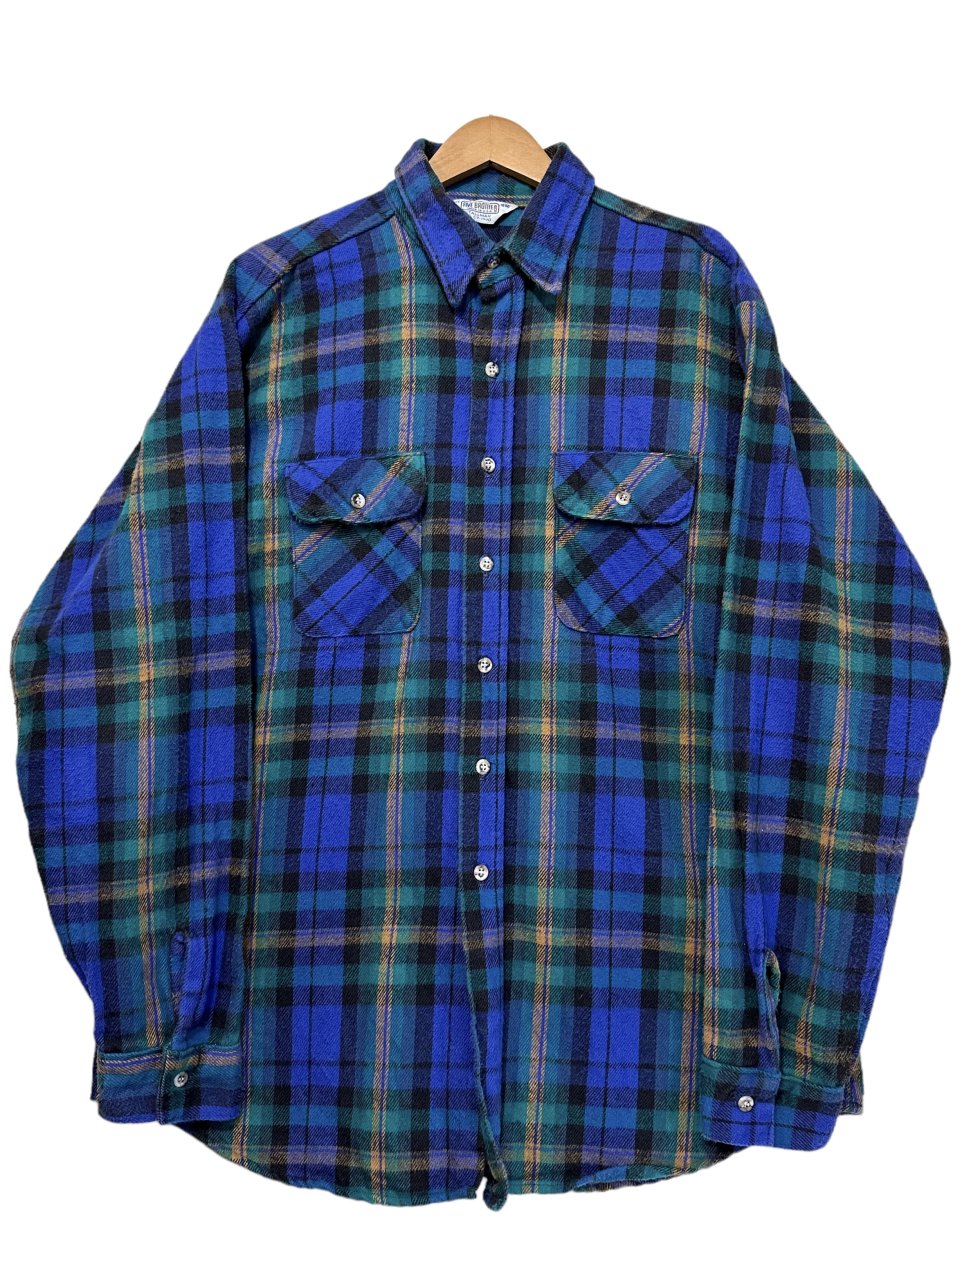 70's〜 five brother flannel shirt